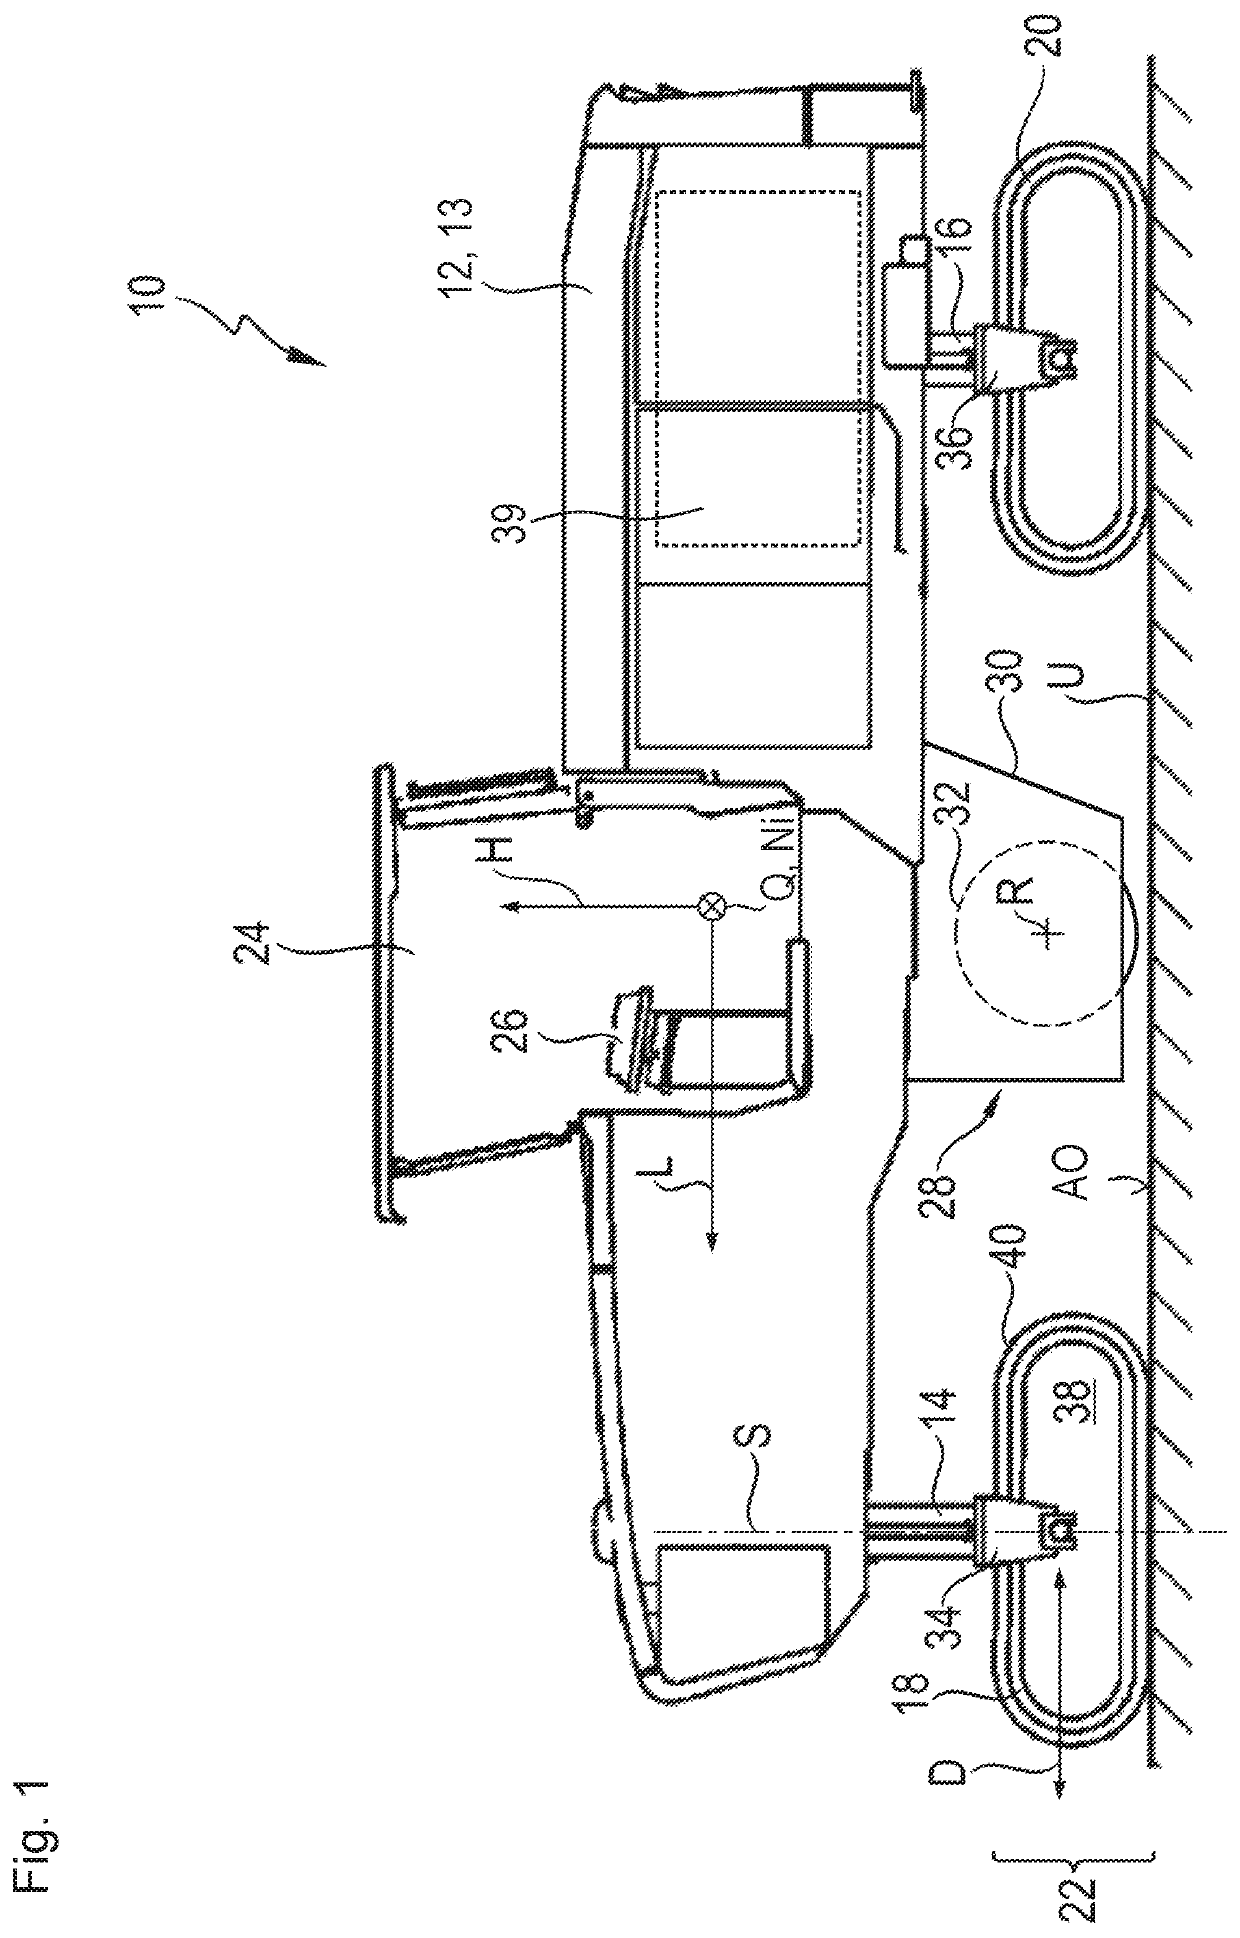 Earth working machine whose working apparatus is displaceable out of its operating position using an onboard actuator